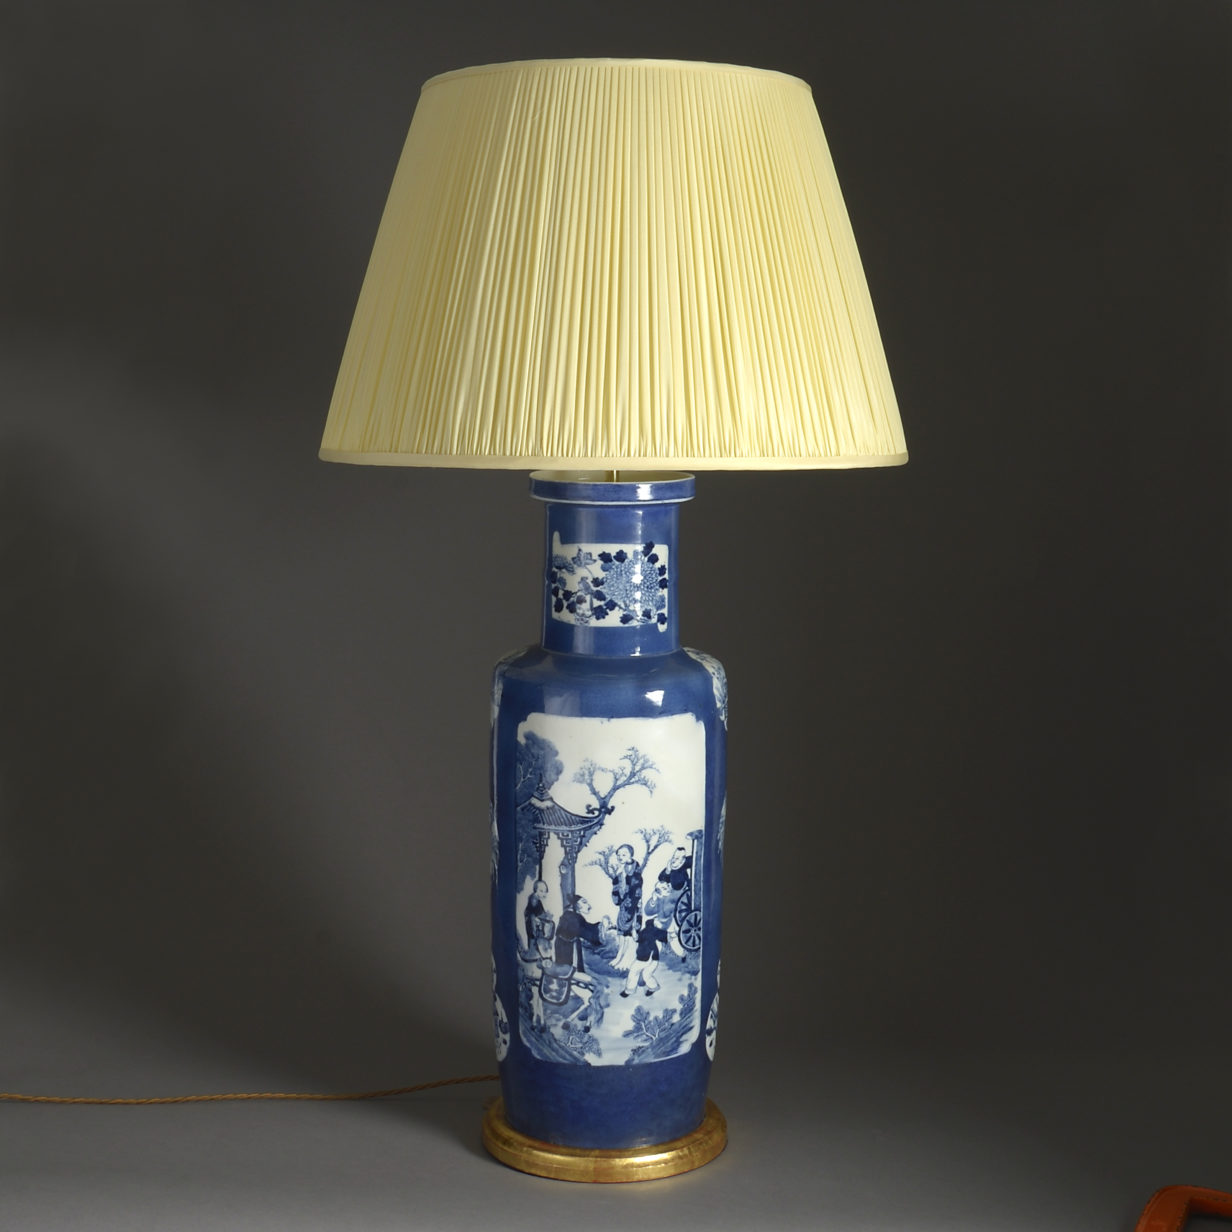 Blue and white rouleau vase lamp